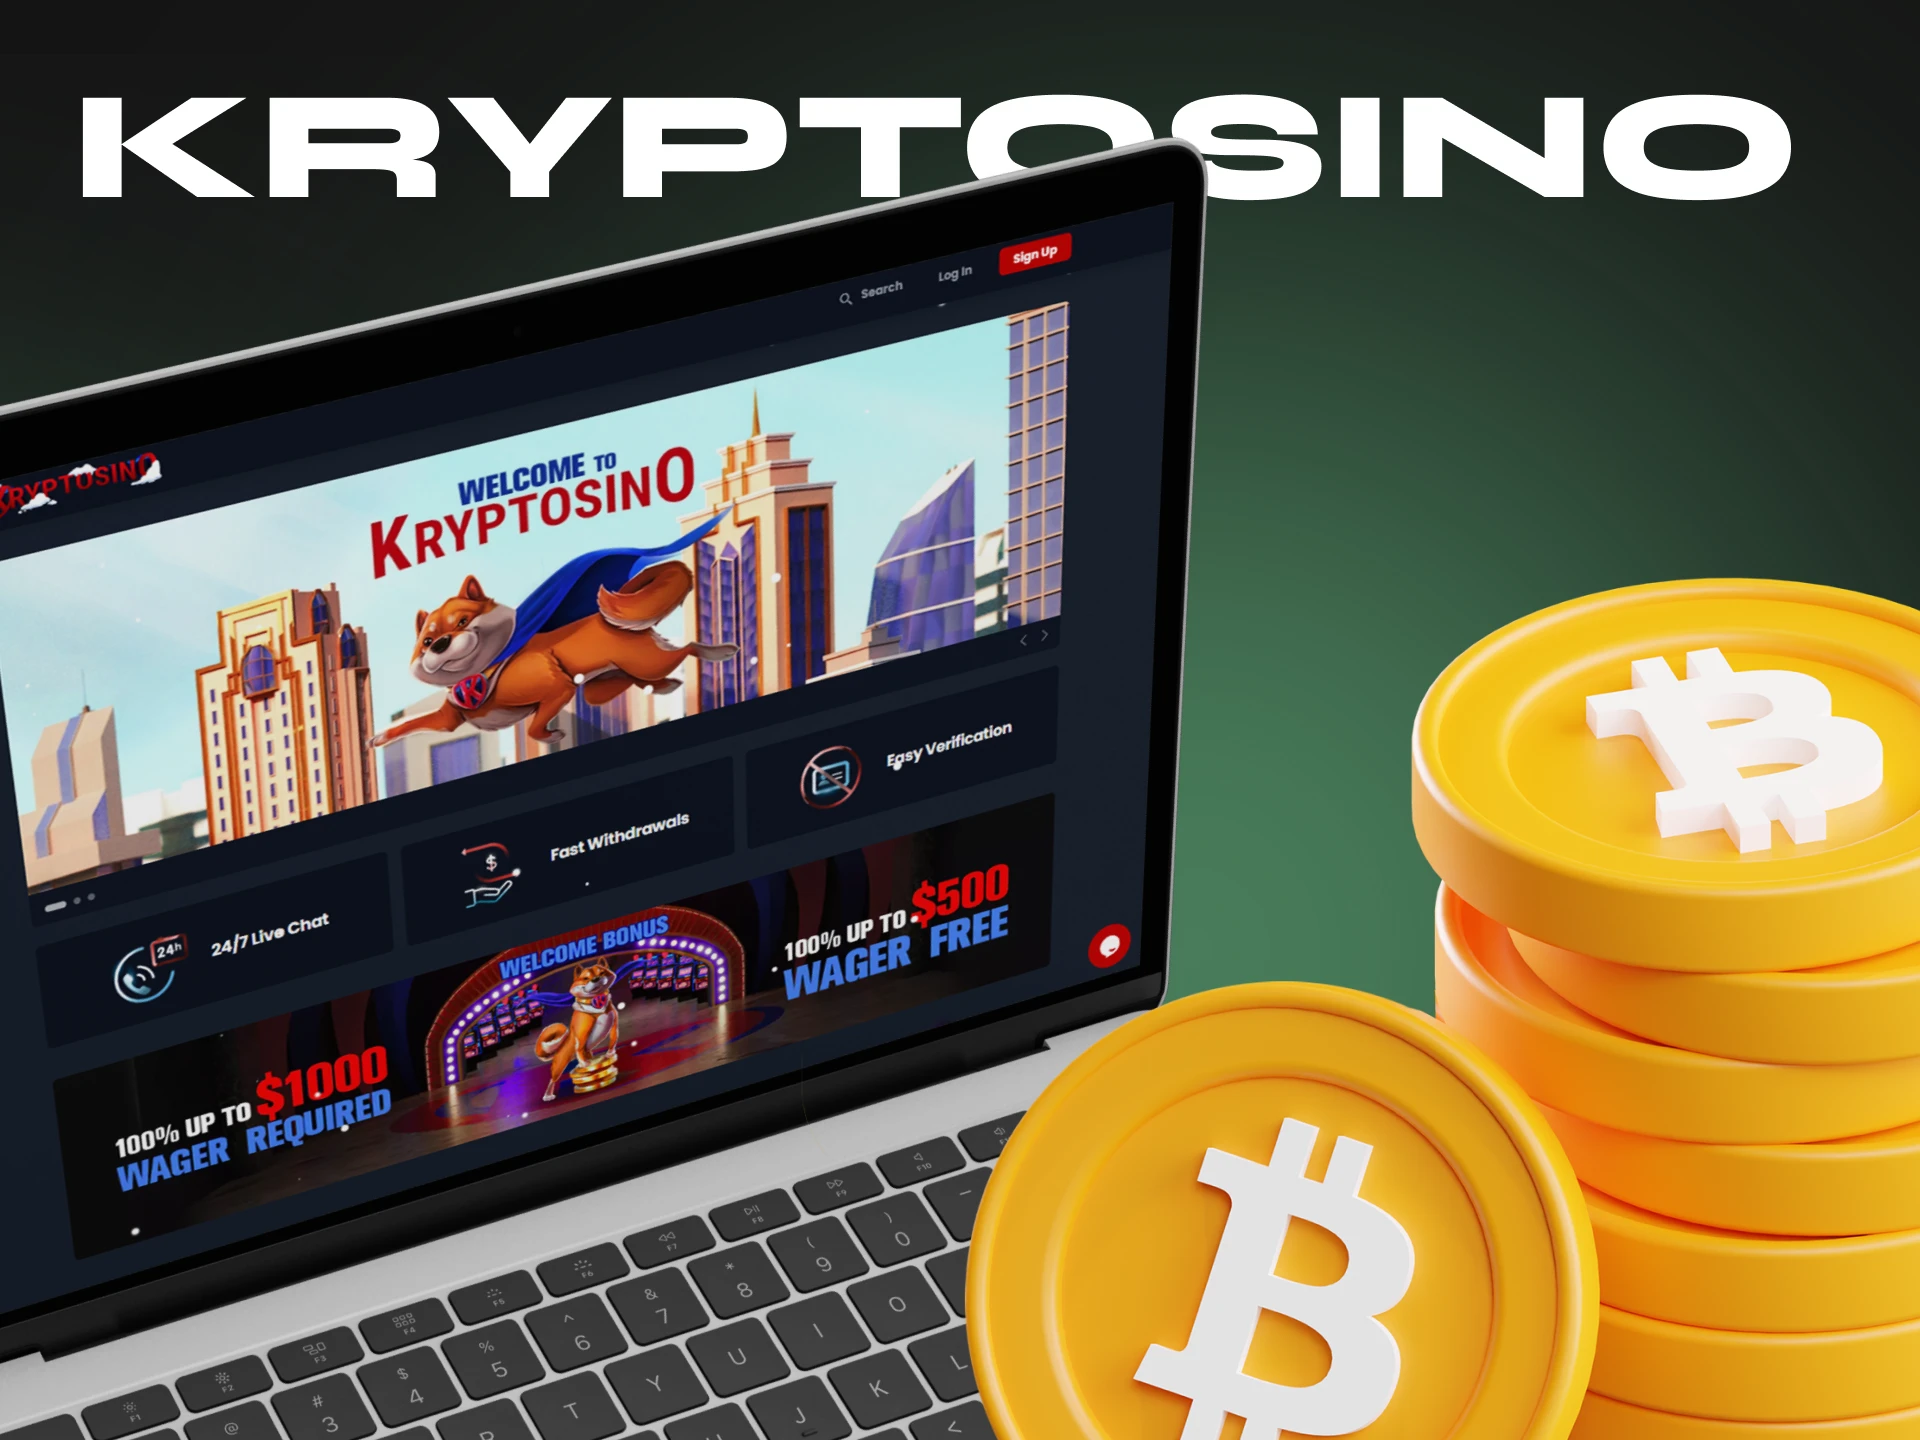 Try playing at Kryptosino, one of the best crypto casinos.